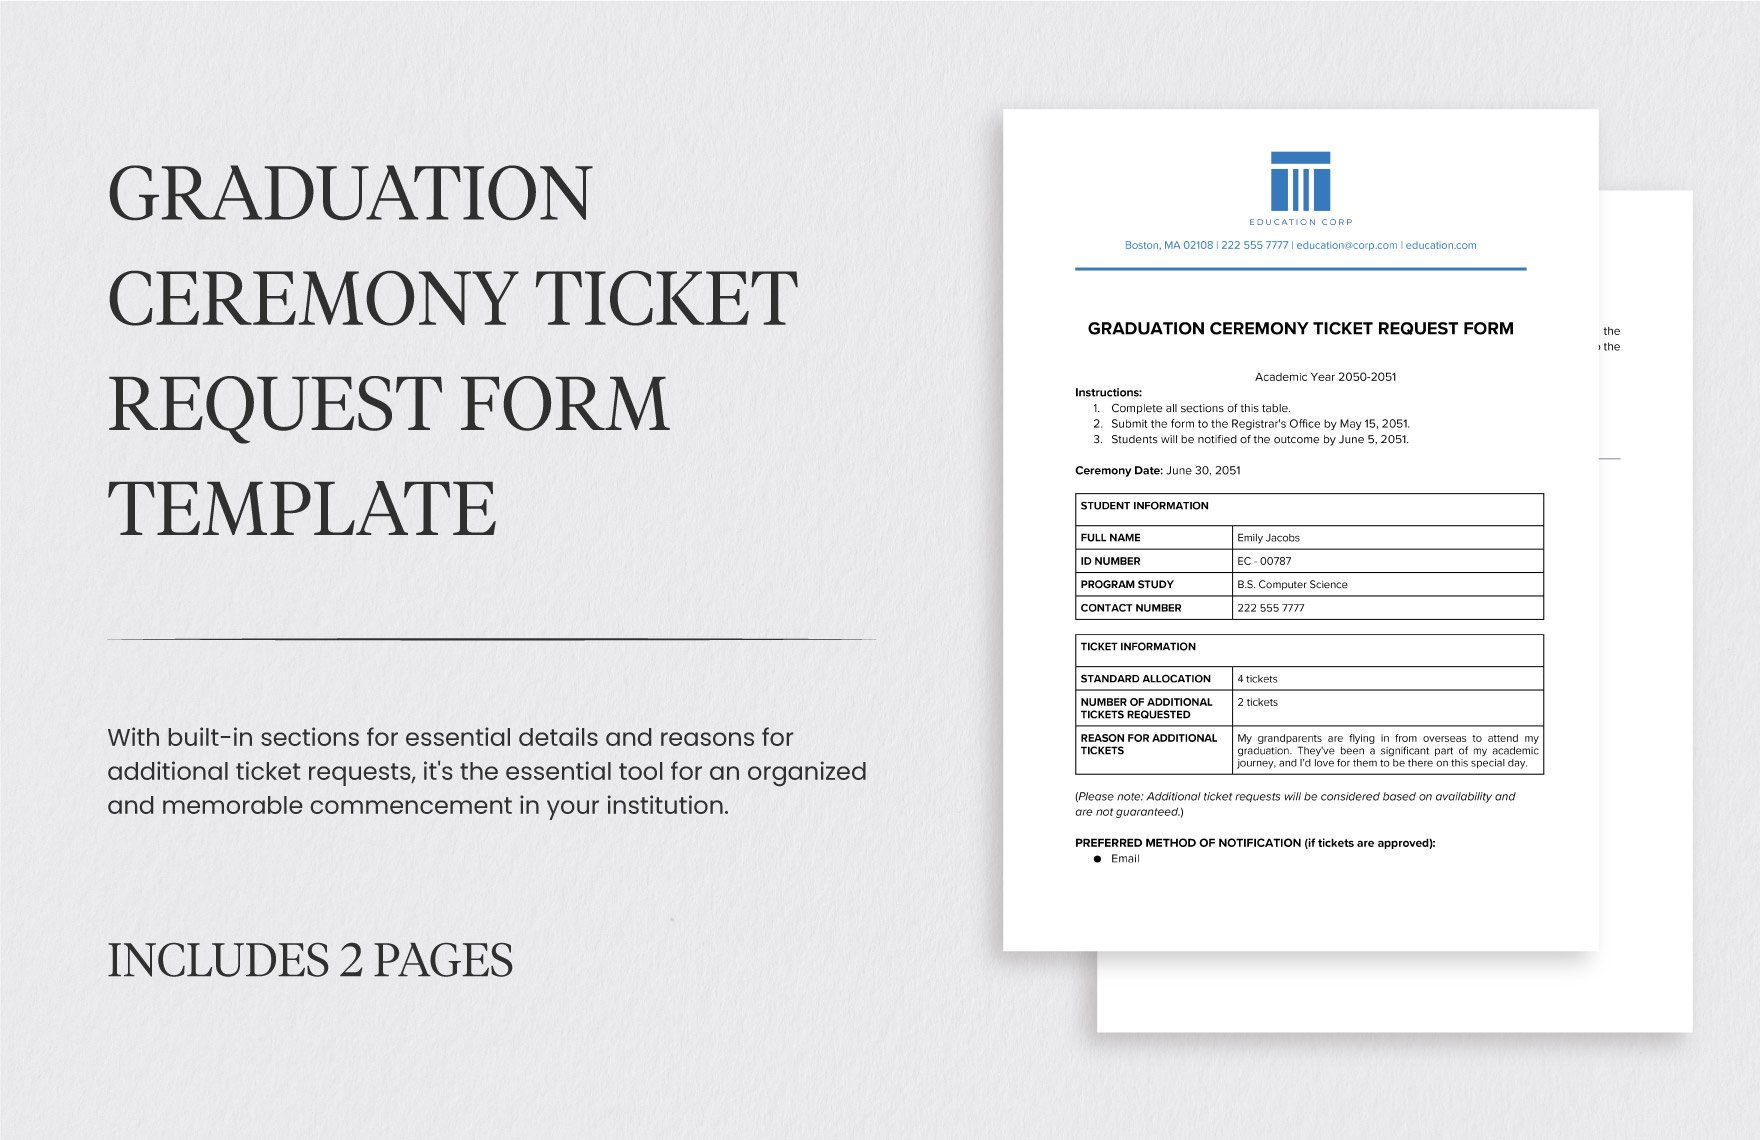 Graduation Ceremony Ticket Request Form Template in Word, Google Docs, PDF